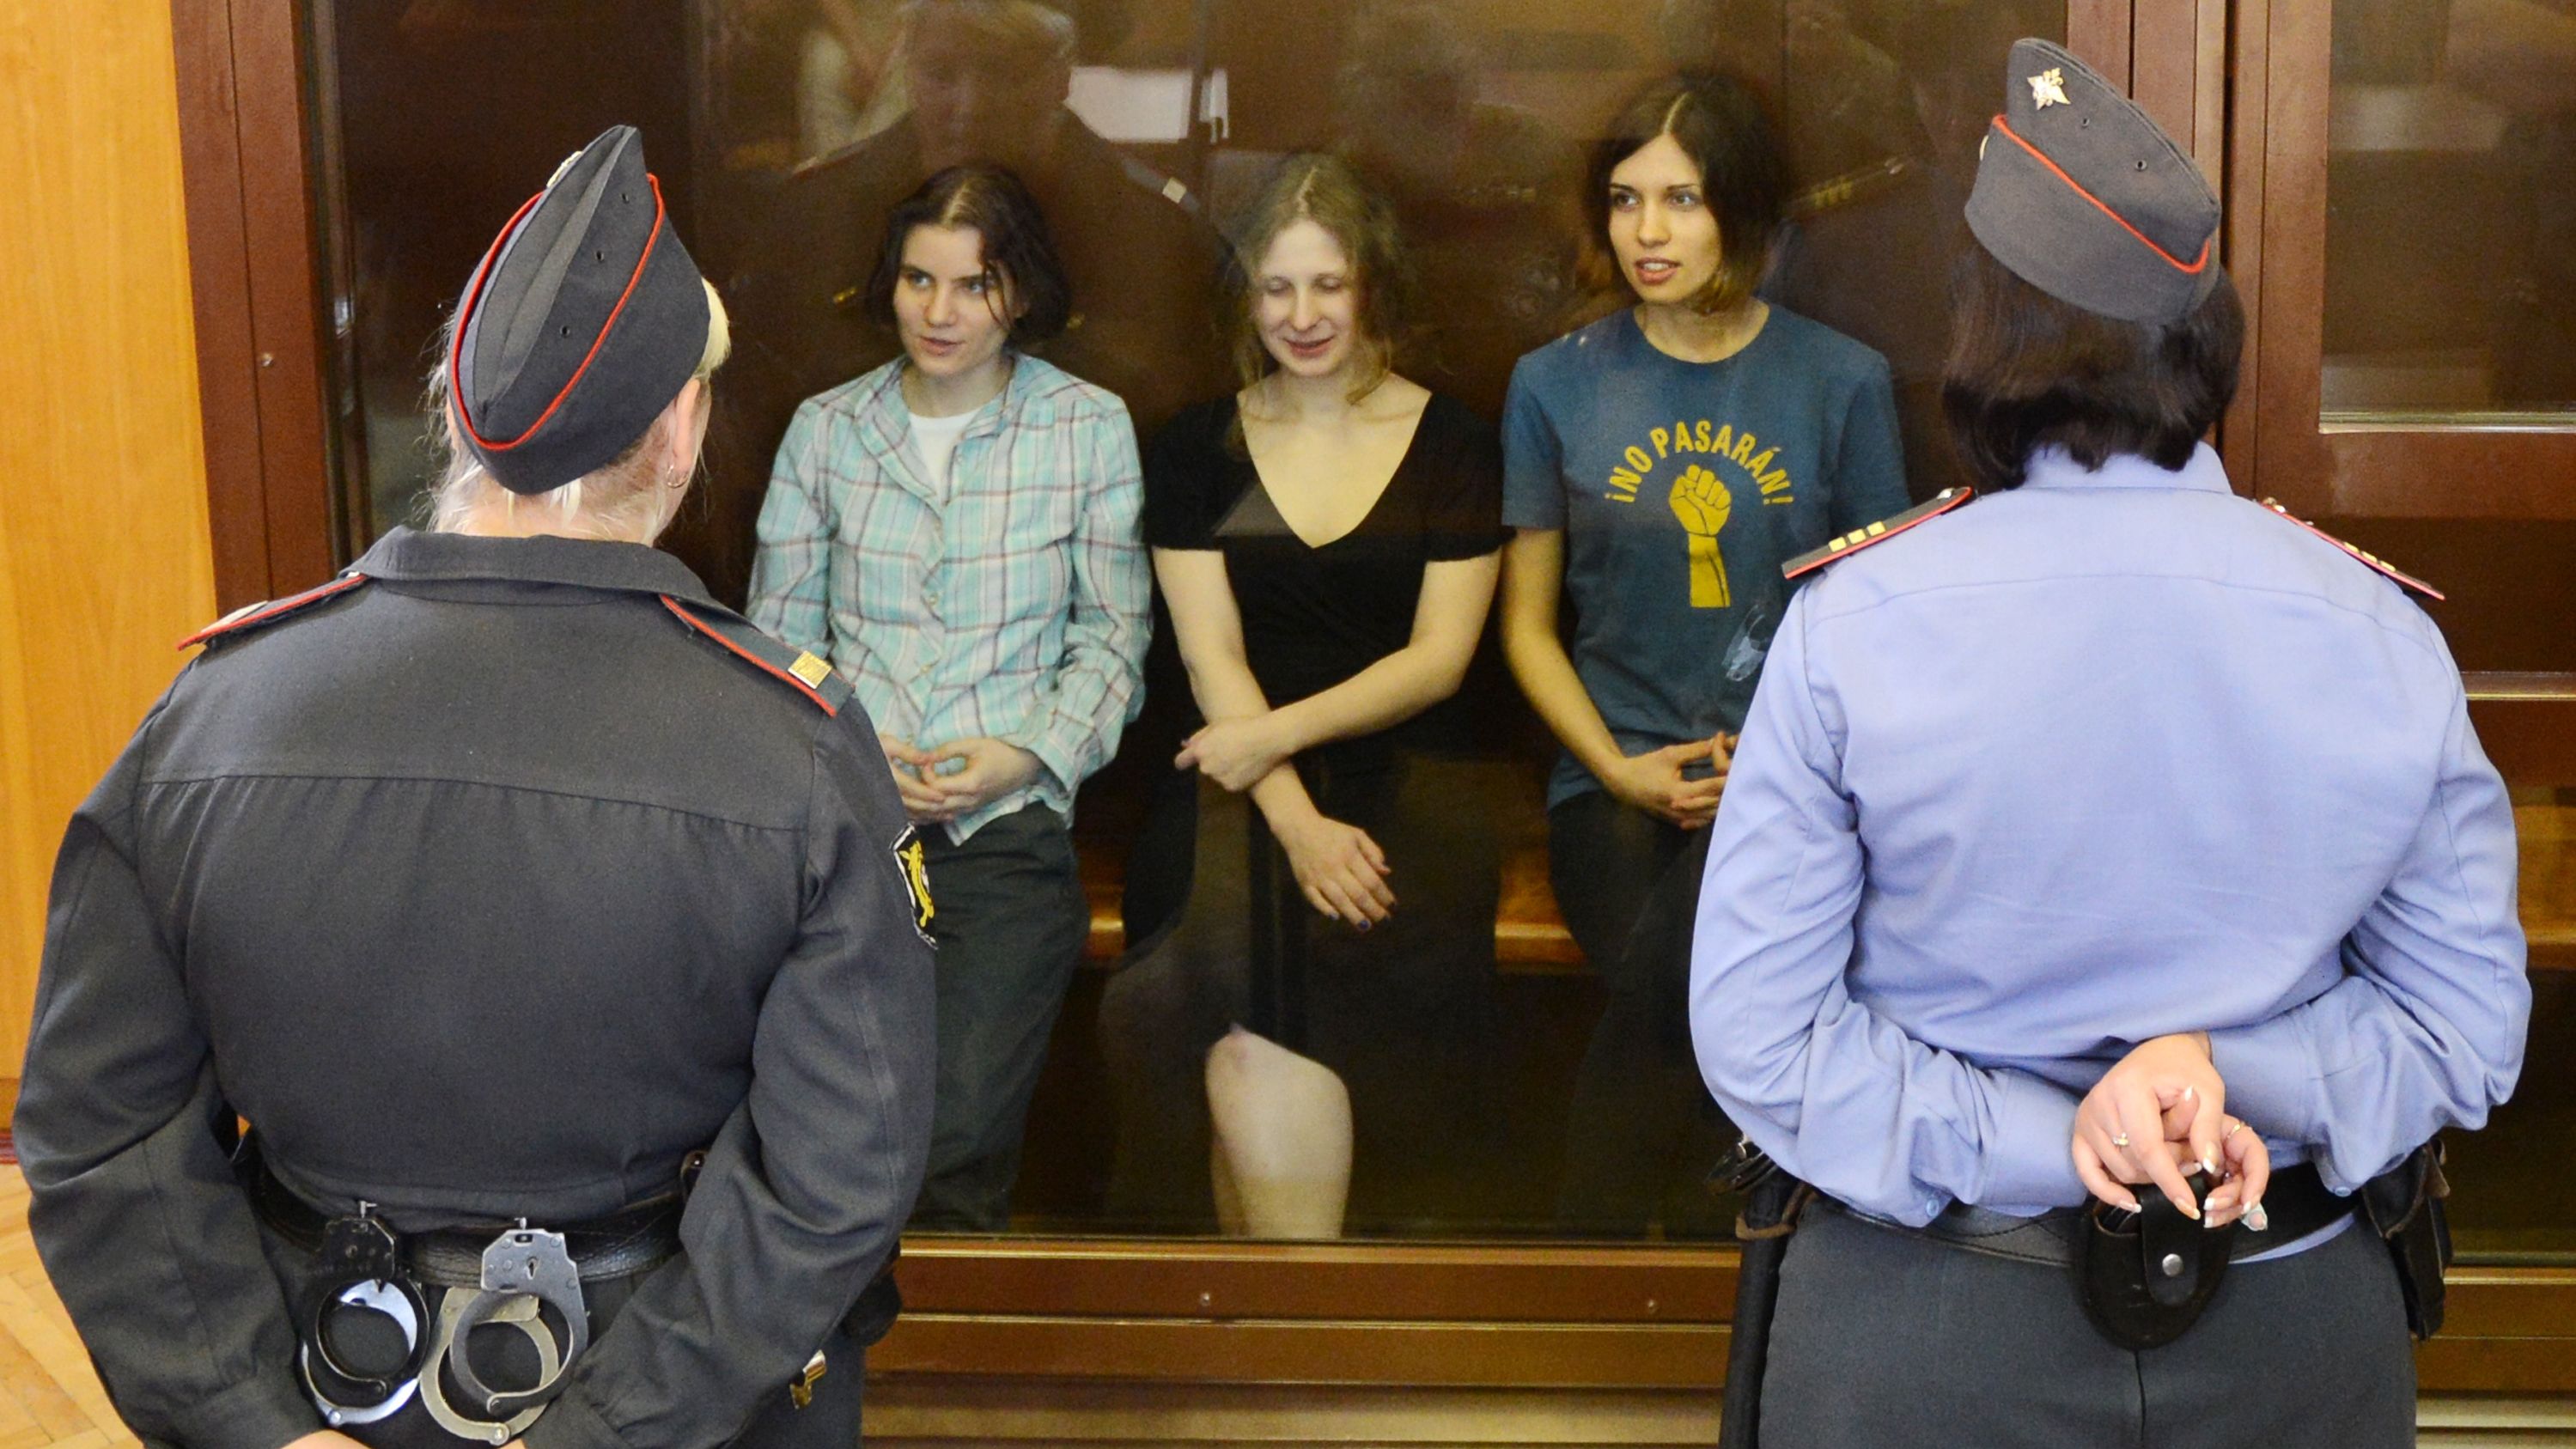 Russian court imprisons Pussy Riot band members on hooliganism charges | CNN